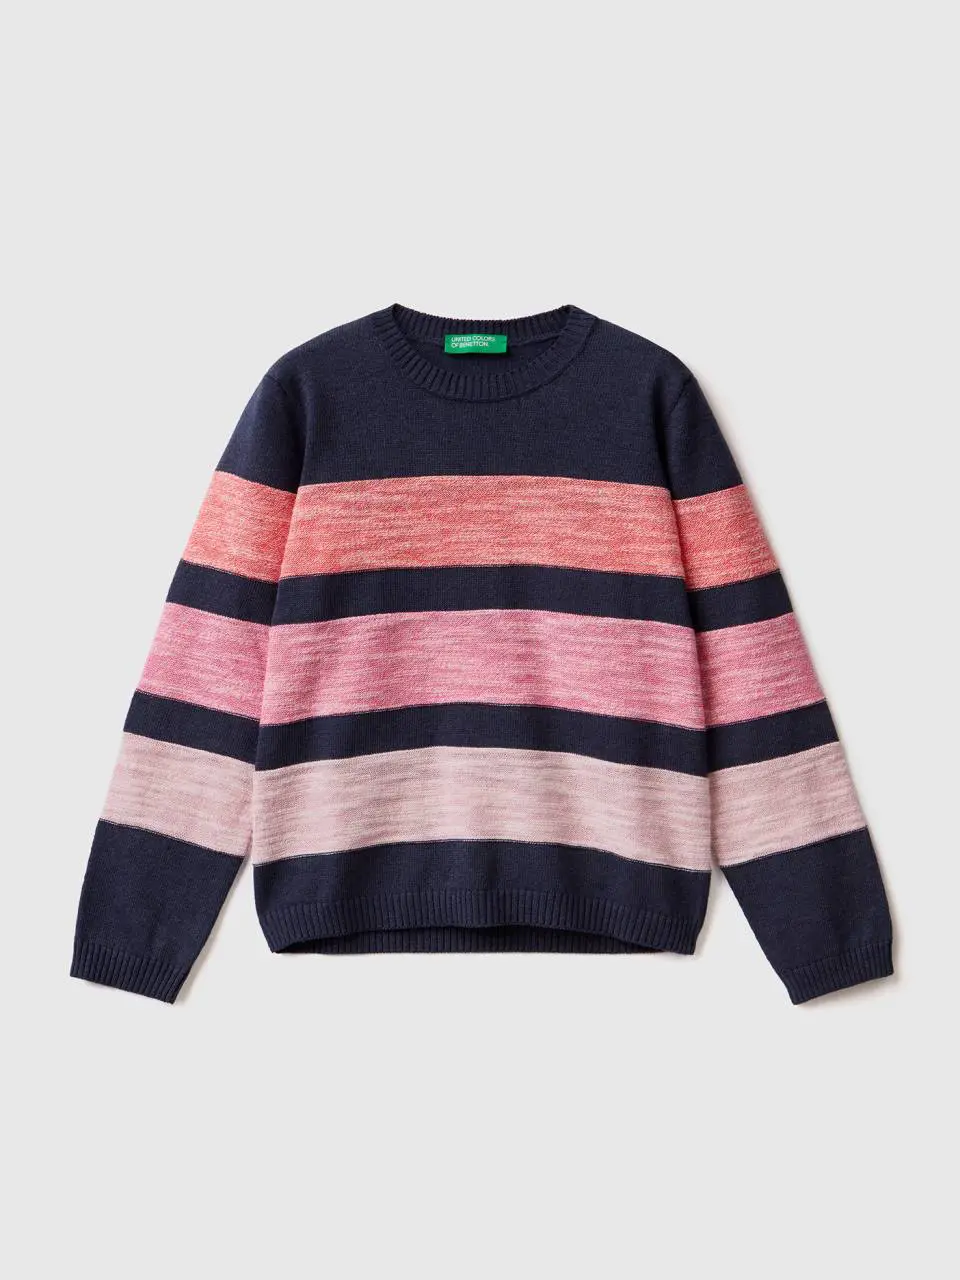 Benetton striped sweater in cotton blend. 1